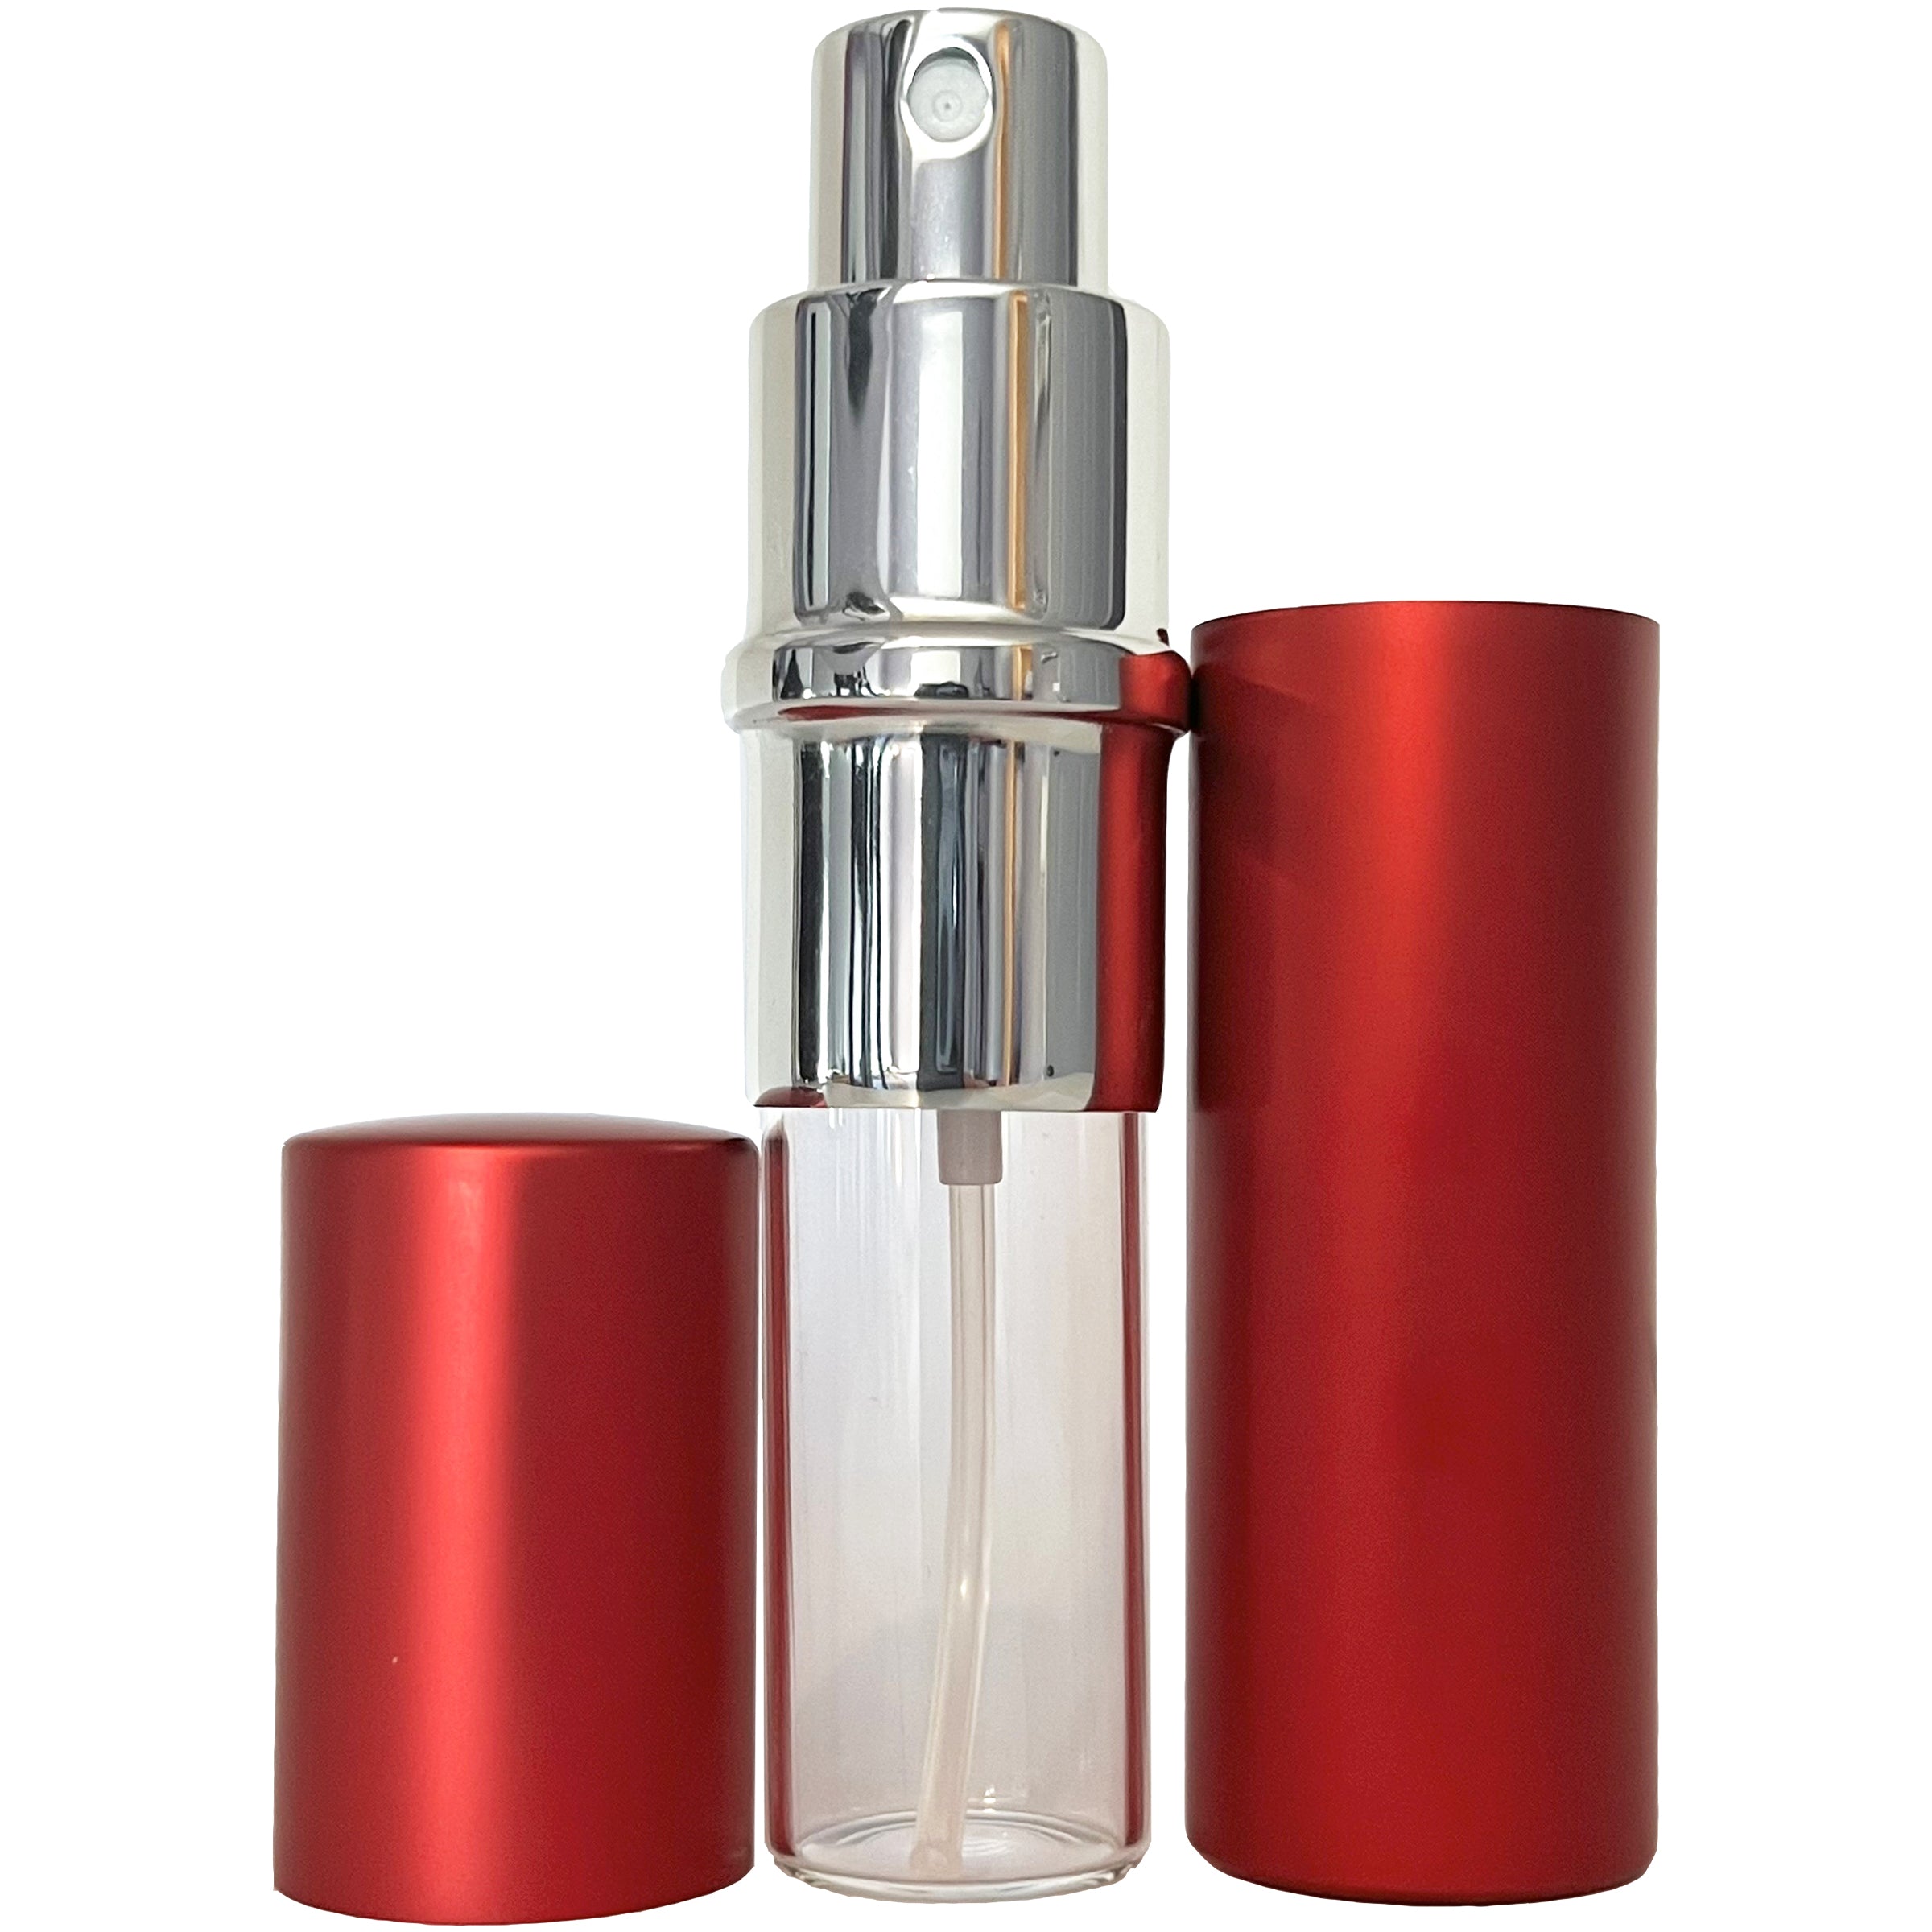 10ml 0.33oz Red Perfume Glass Spray Deluxe Bottles Silver Atomizers